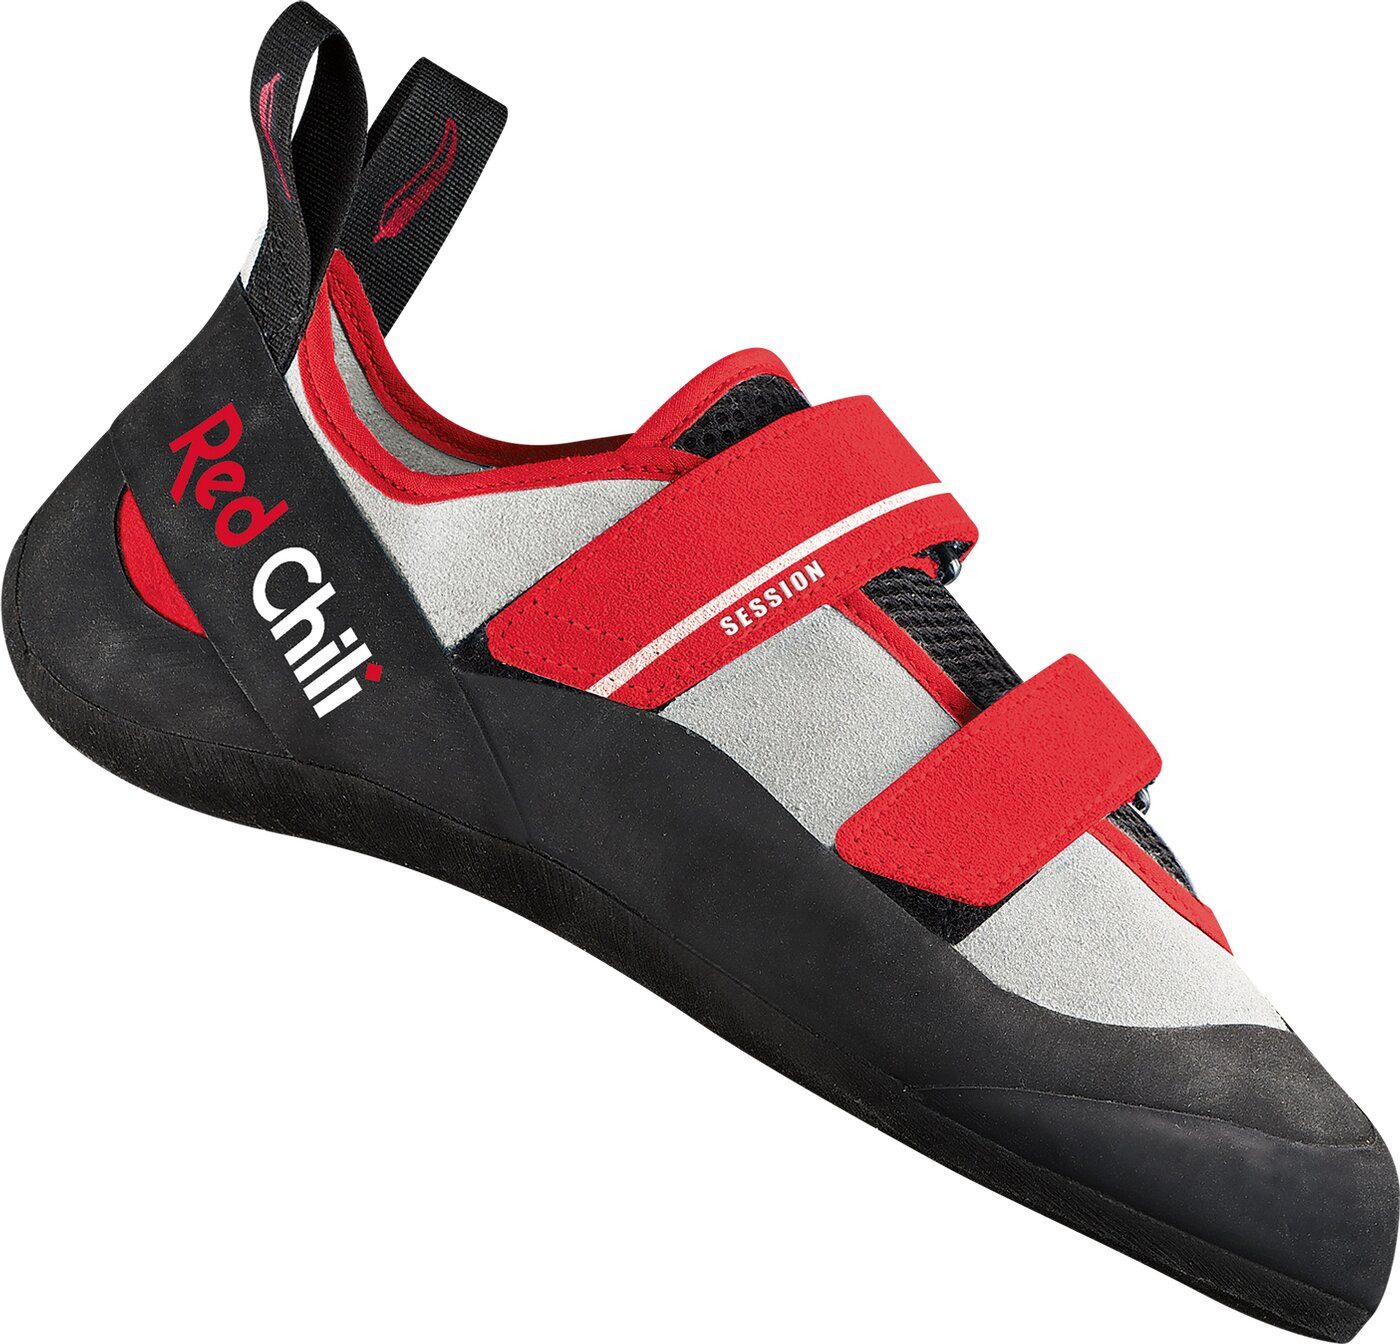 Red Chili Session 4 ANTHRACITE-RED Kletterschuh